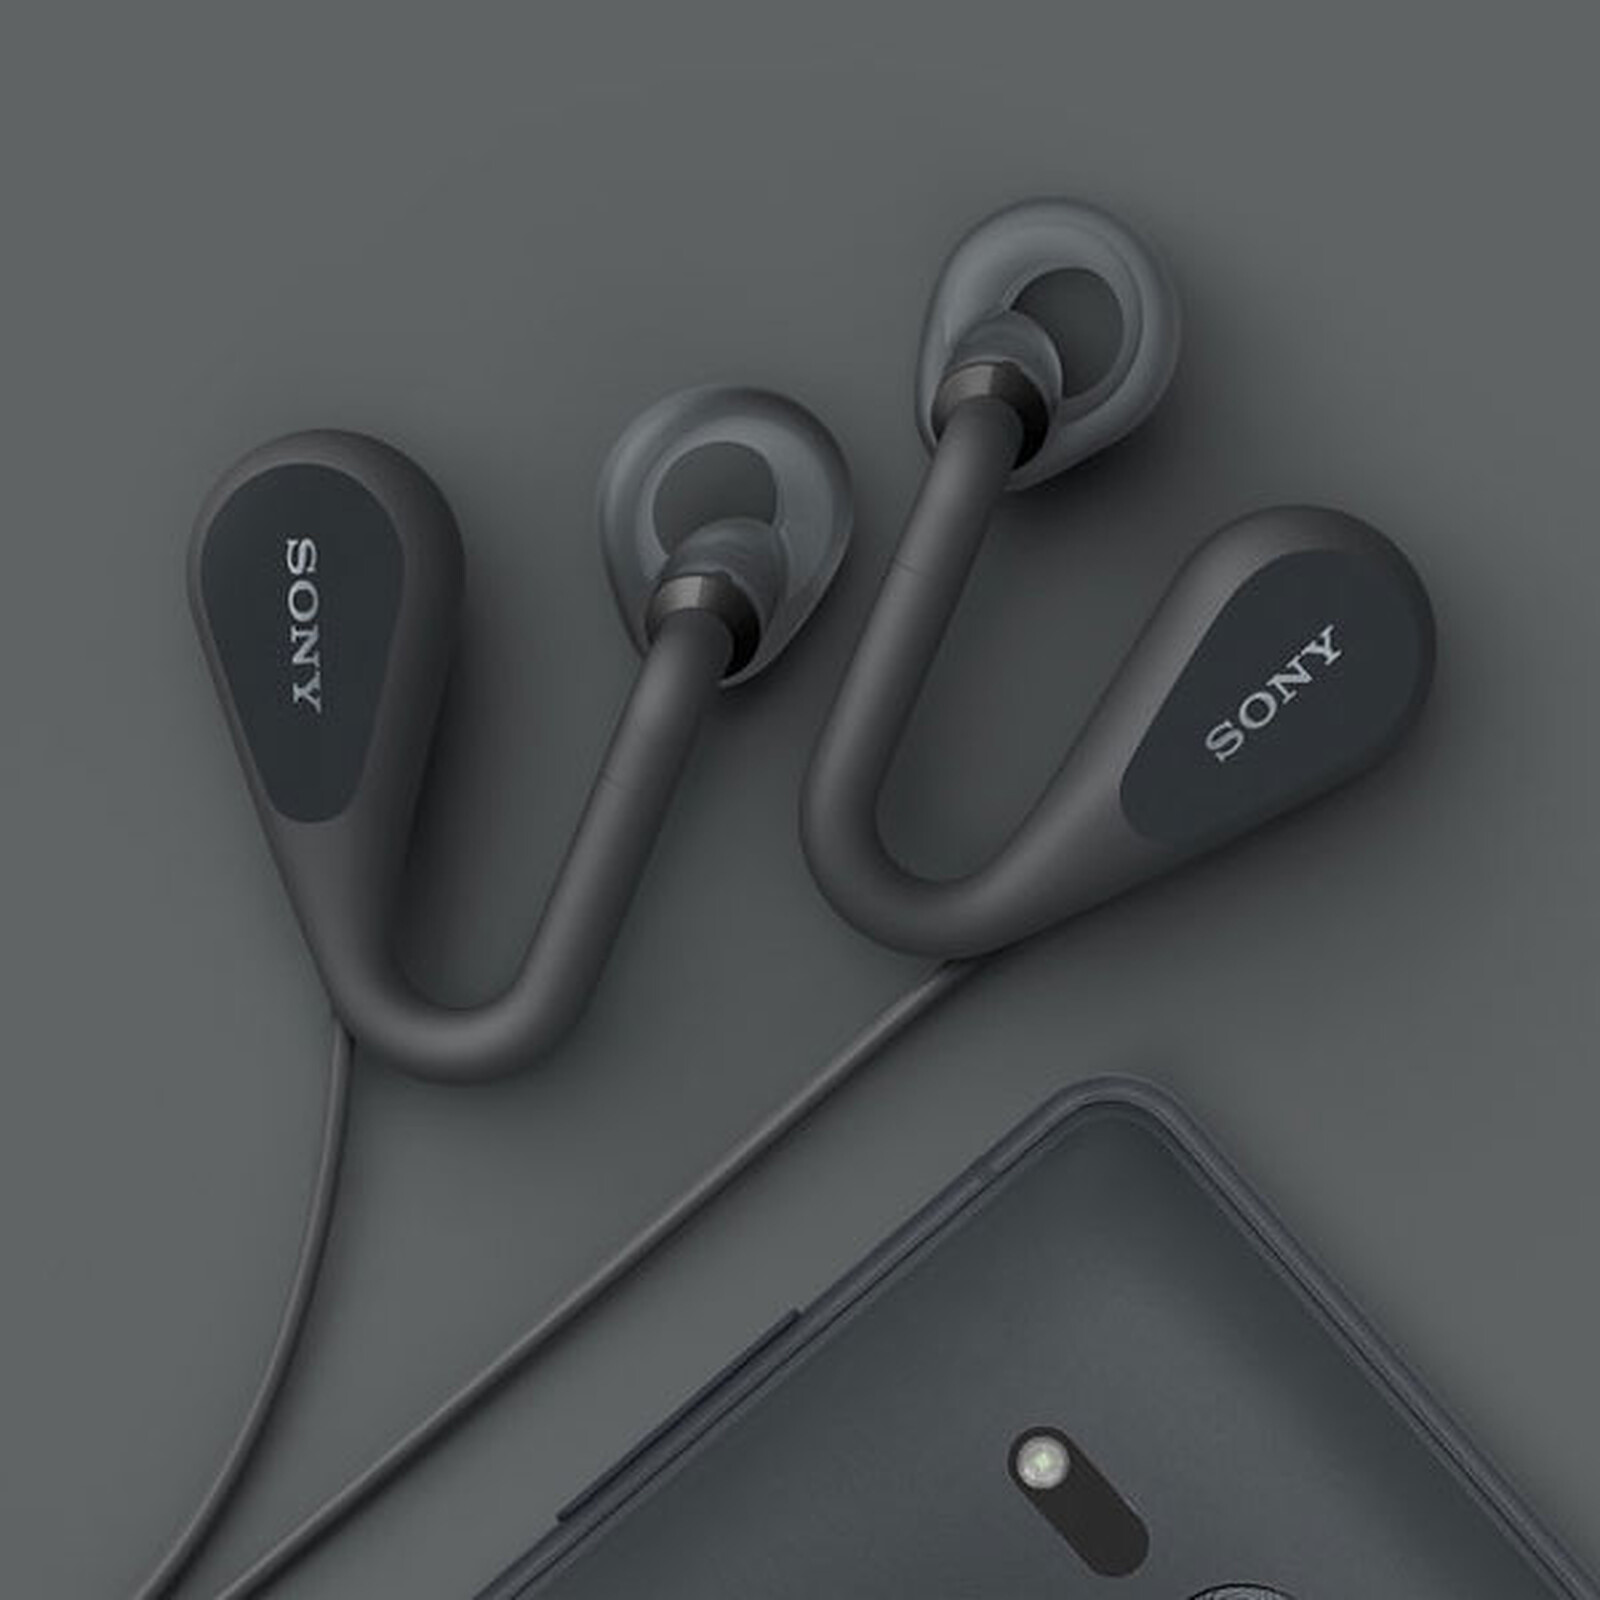 Sony STH32 negro - Kit manos libres y auriculares - LDLC